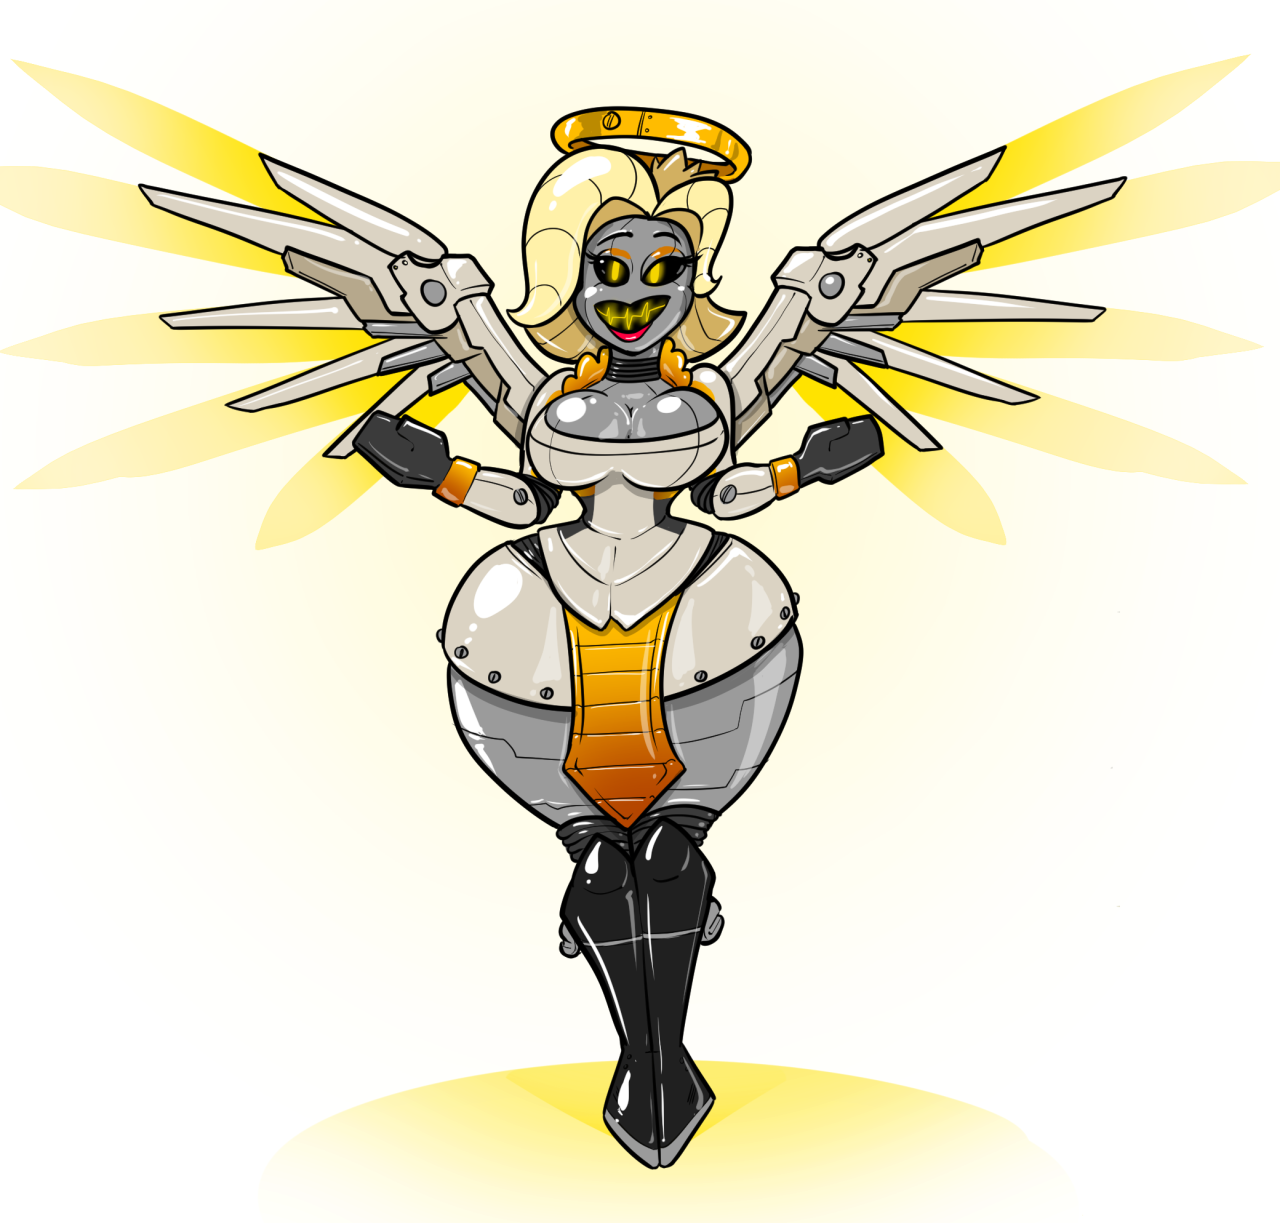 Mercy and training bot